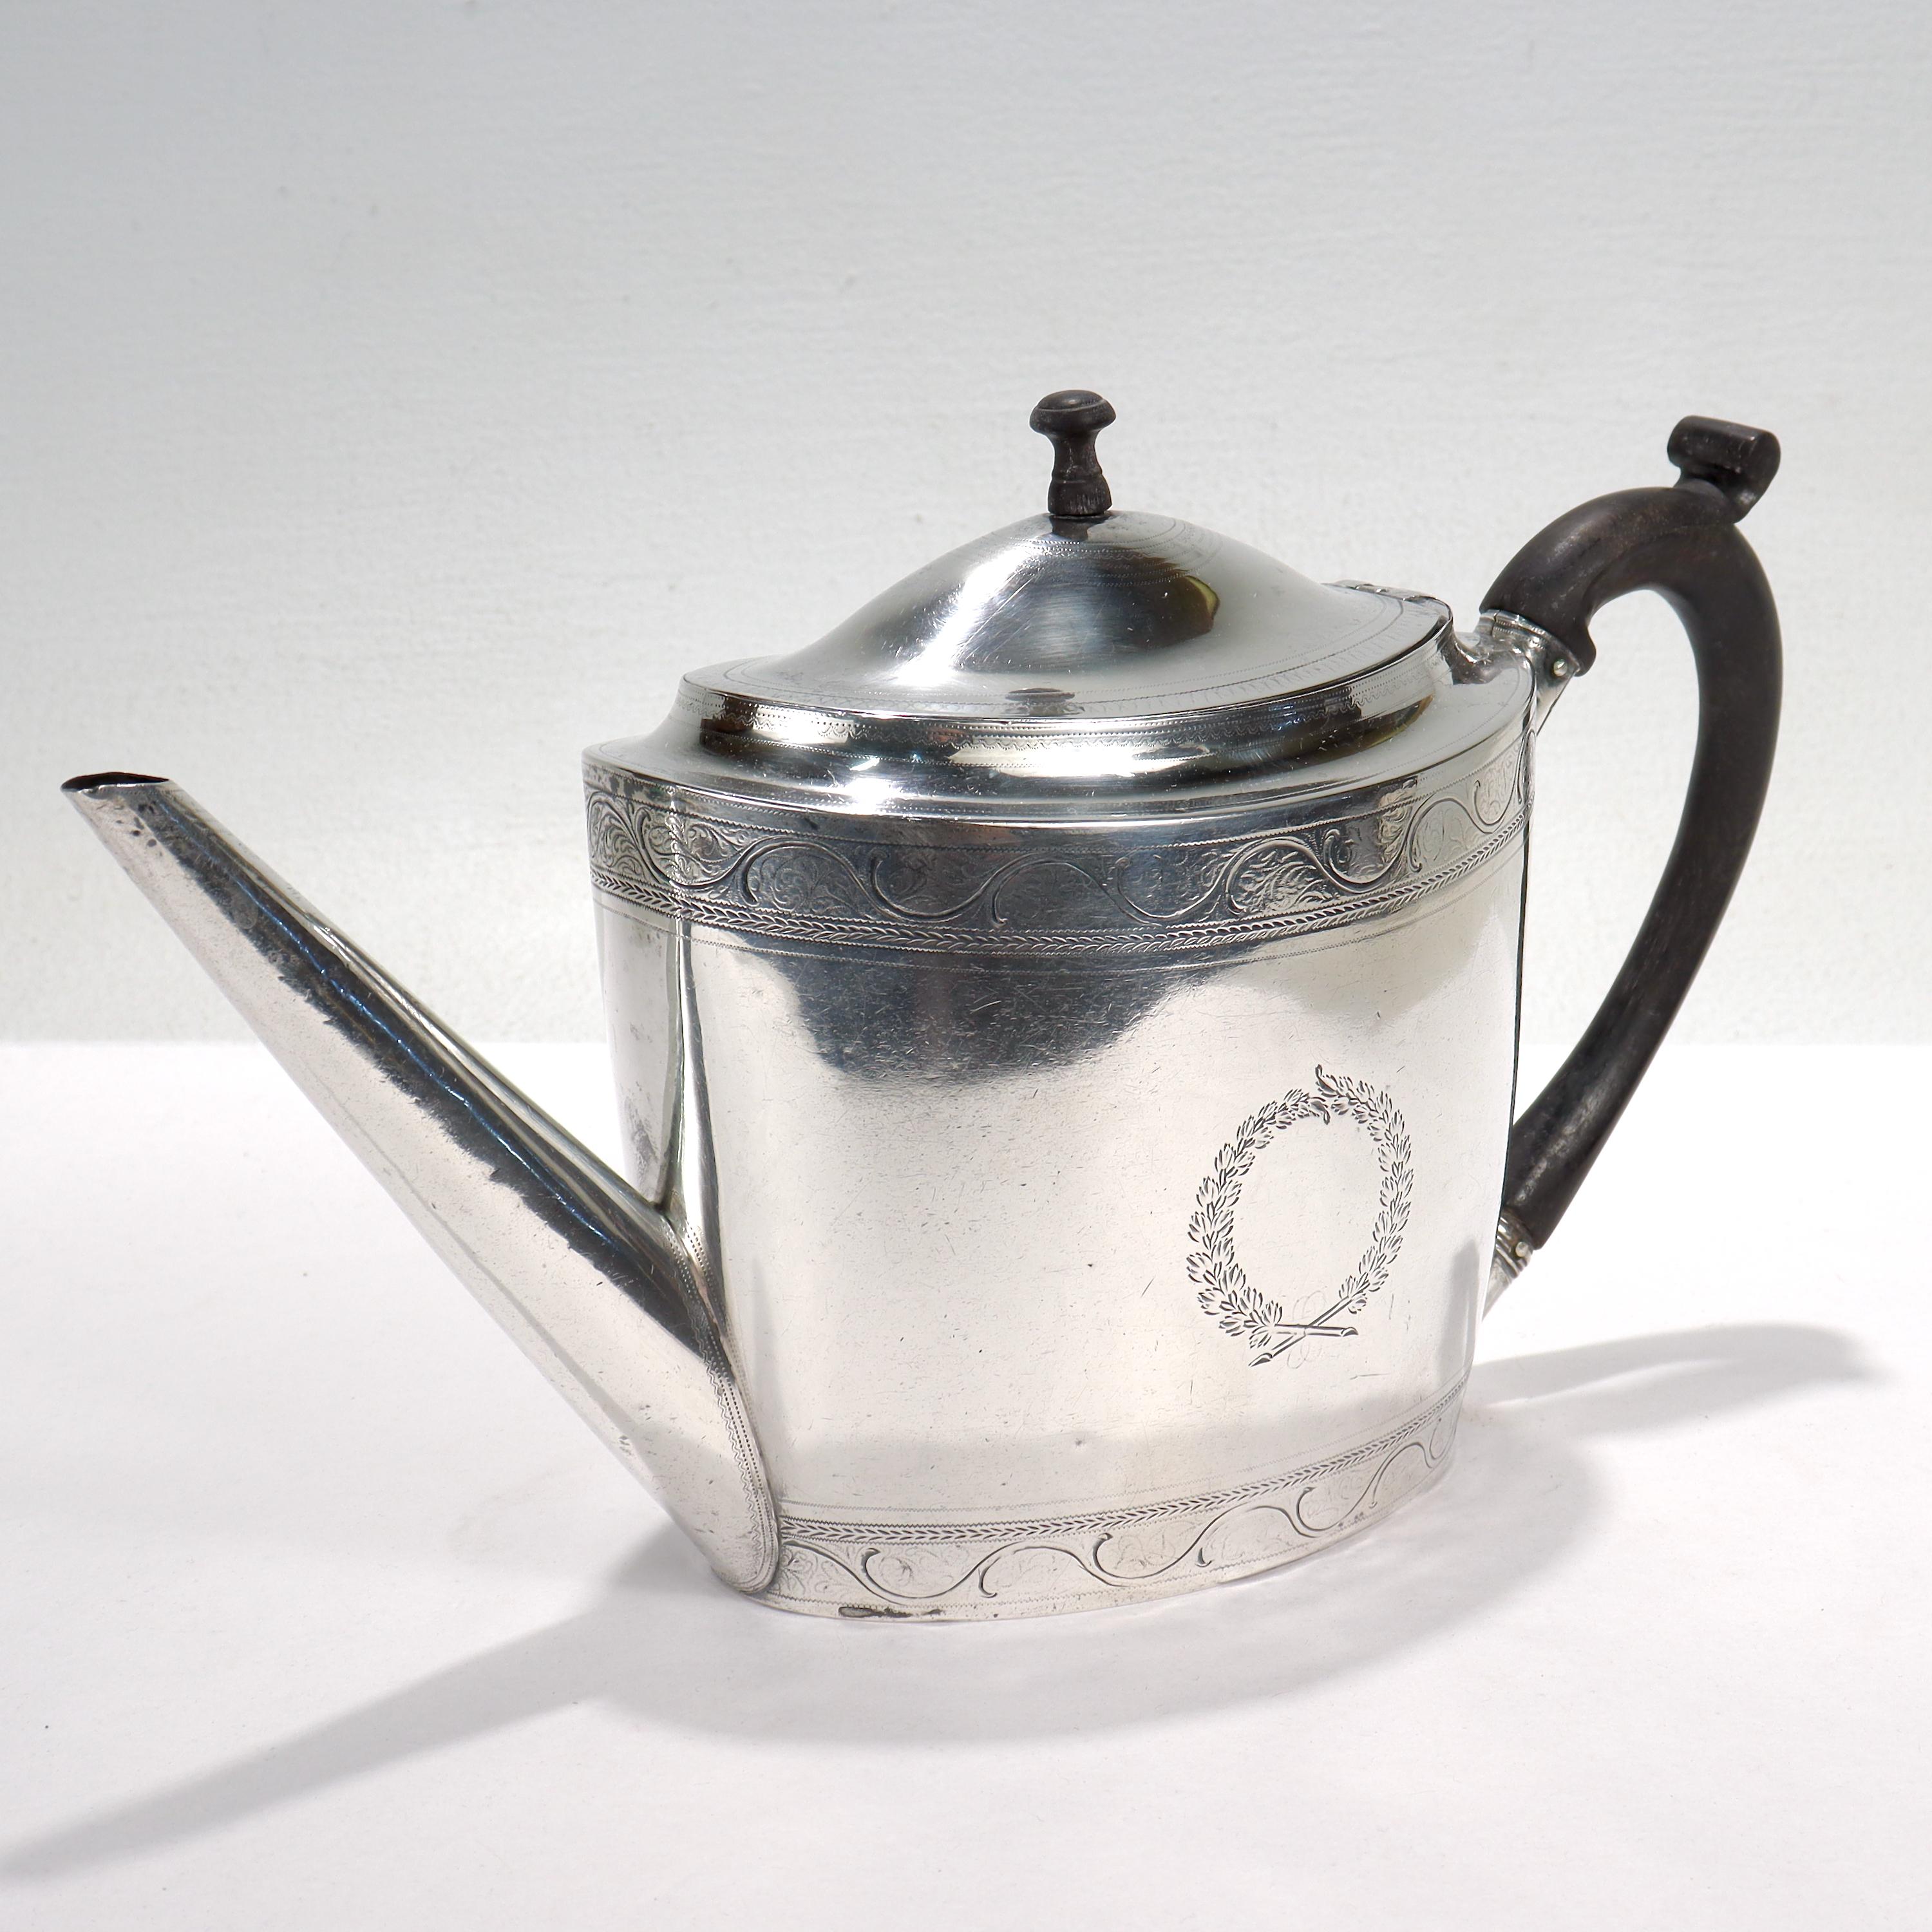 A fine antique Georgian teapot.

In sterling silver.

By Henry Chawmer & John Emes of London, England. 

Each side of the teapot is engraved wreath shaped cartouche. The top and bottom are decorated with engraved linework around the circumference,